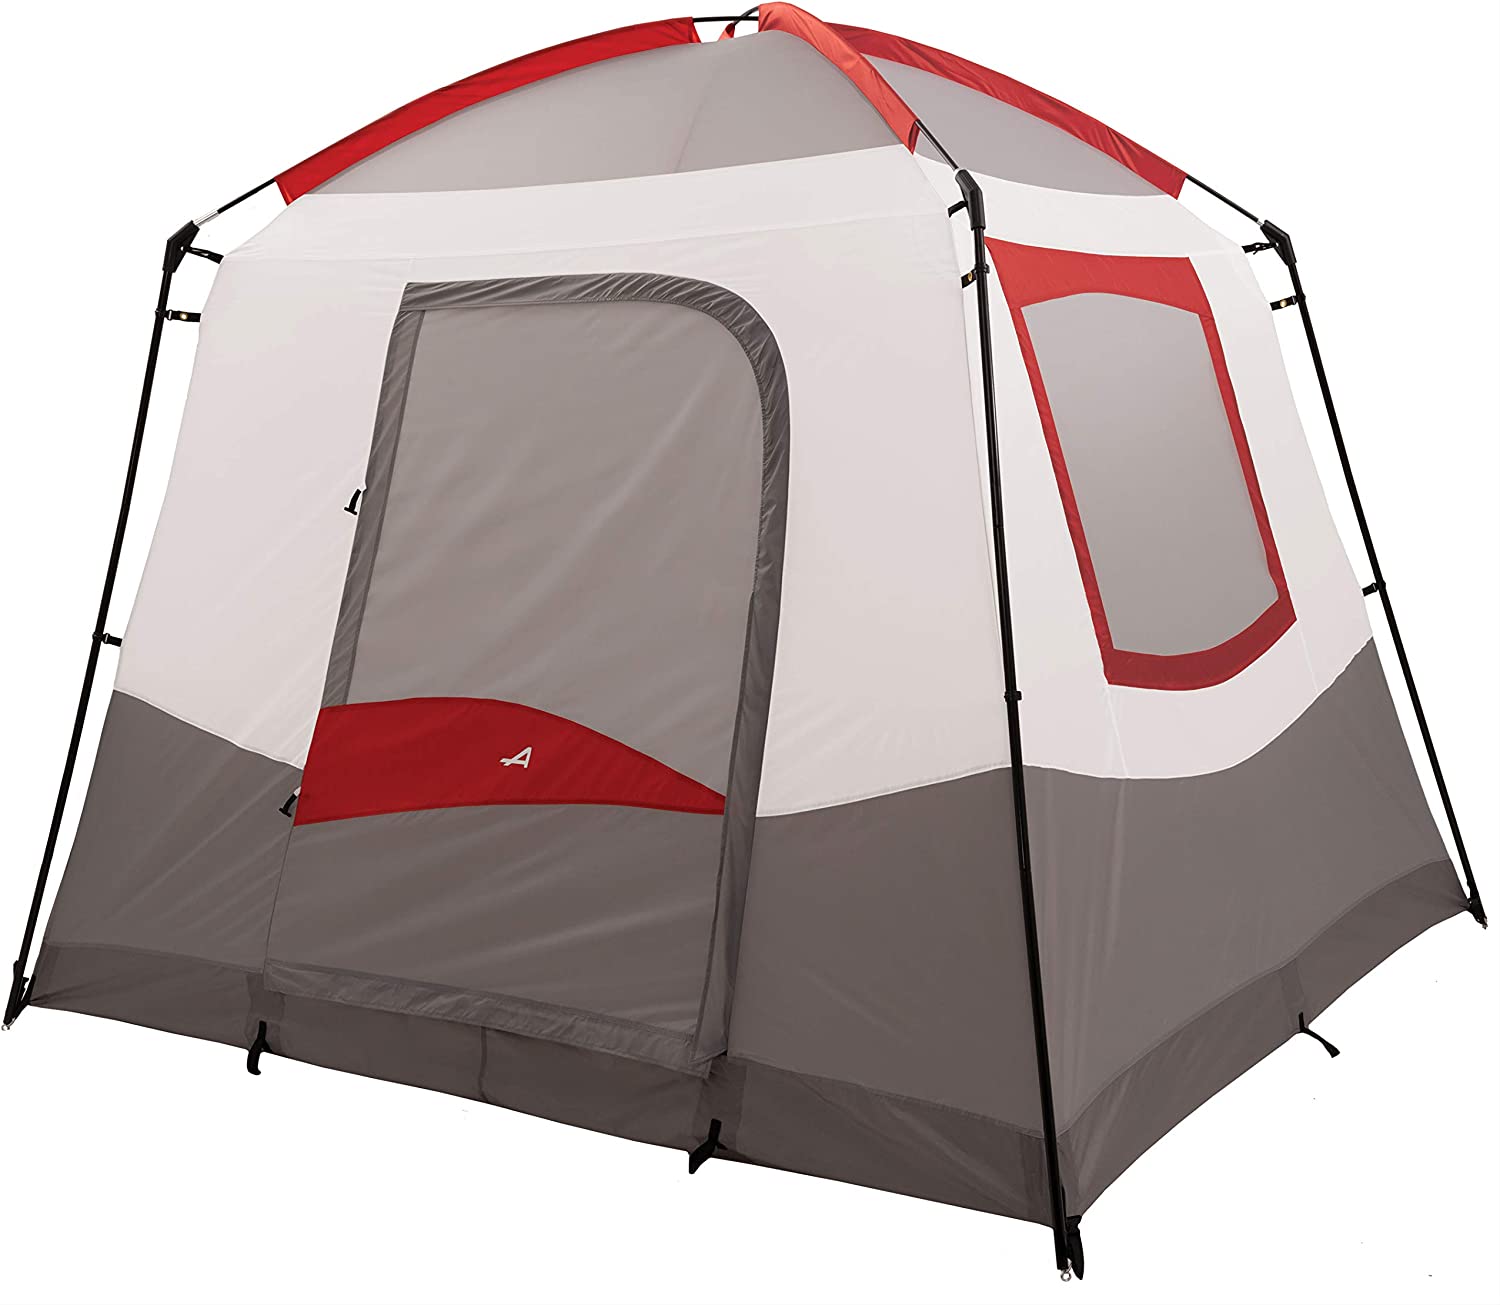 Alps Mountaineering Camp Creek Tents: 4-Person $149, 6-Person $160 + Free Shipping